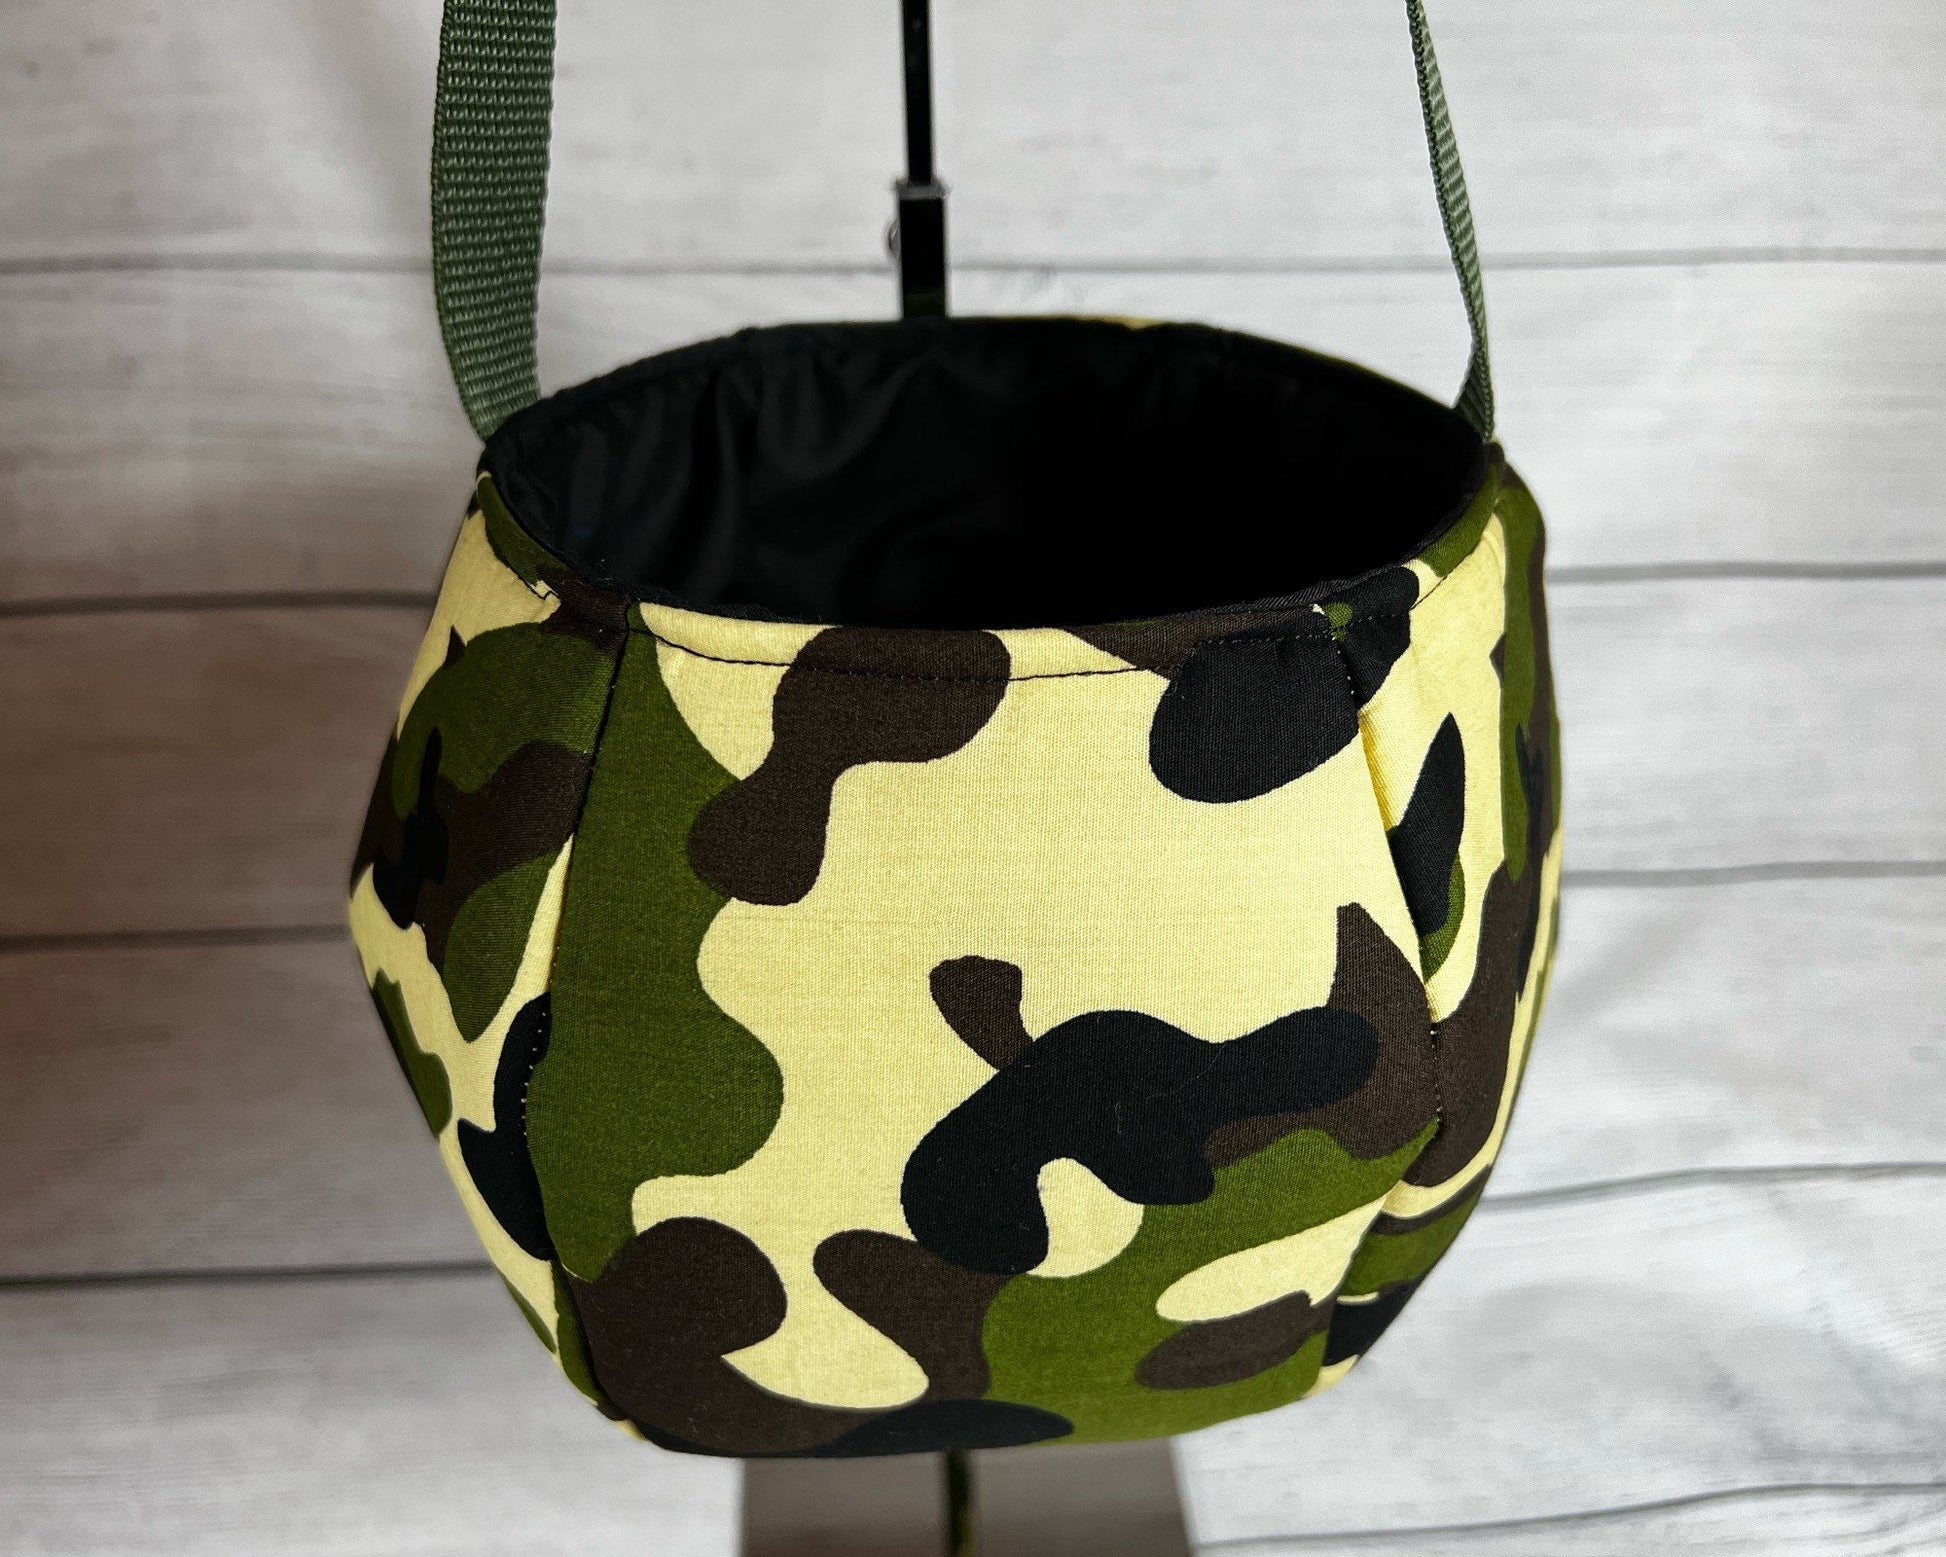 Blue, Green, Brown, Pink Camo Tote Bags - Tote - Forest - Hunting - Pattern - Hide - Everyday - Holiday - Easter - Halloween - Party- Gift